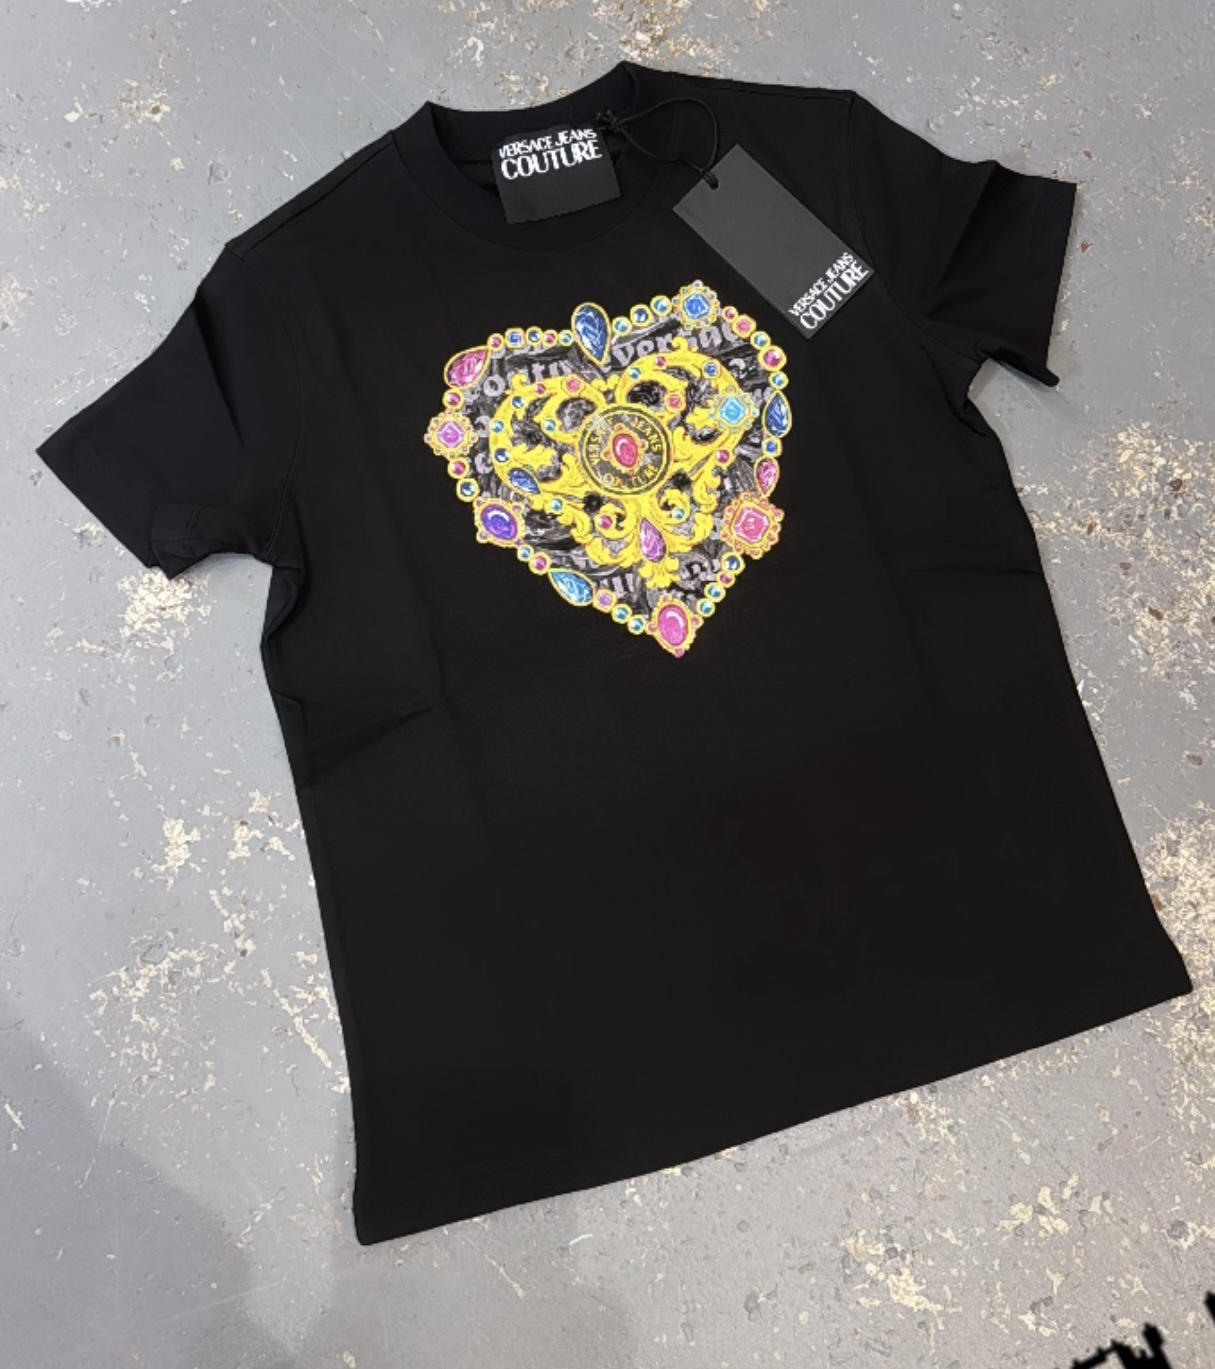 Versace Jeans Versace jeans couture logo heart